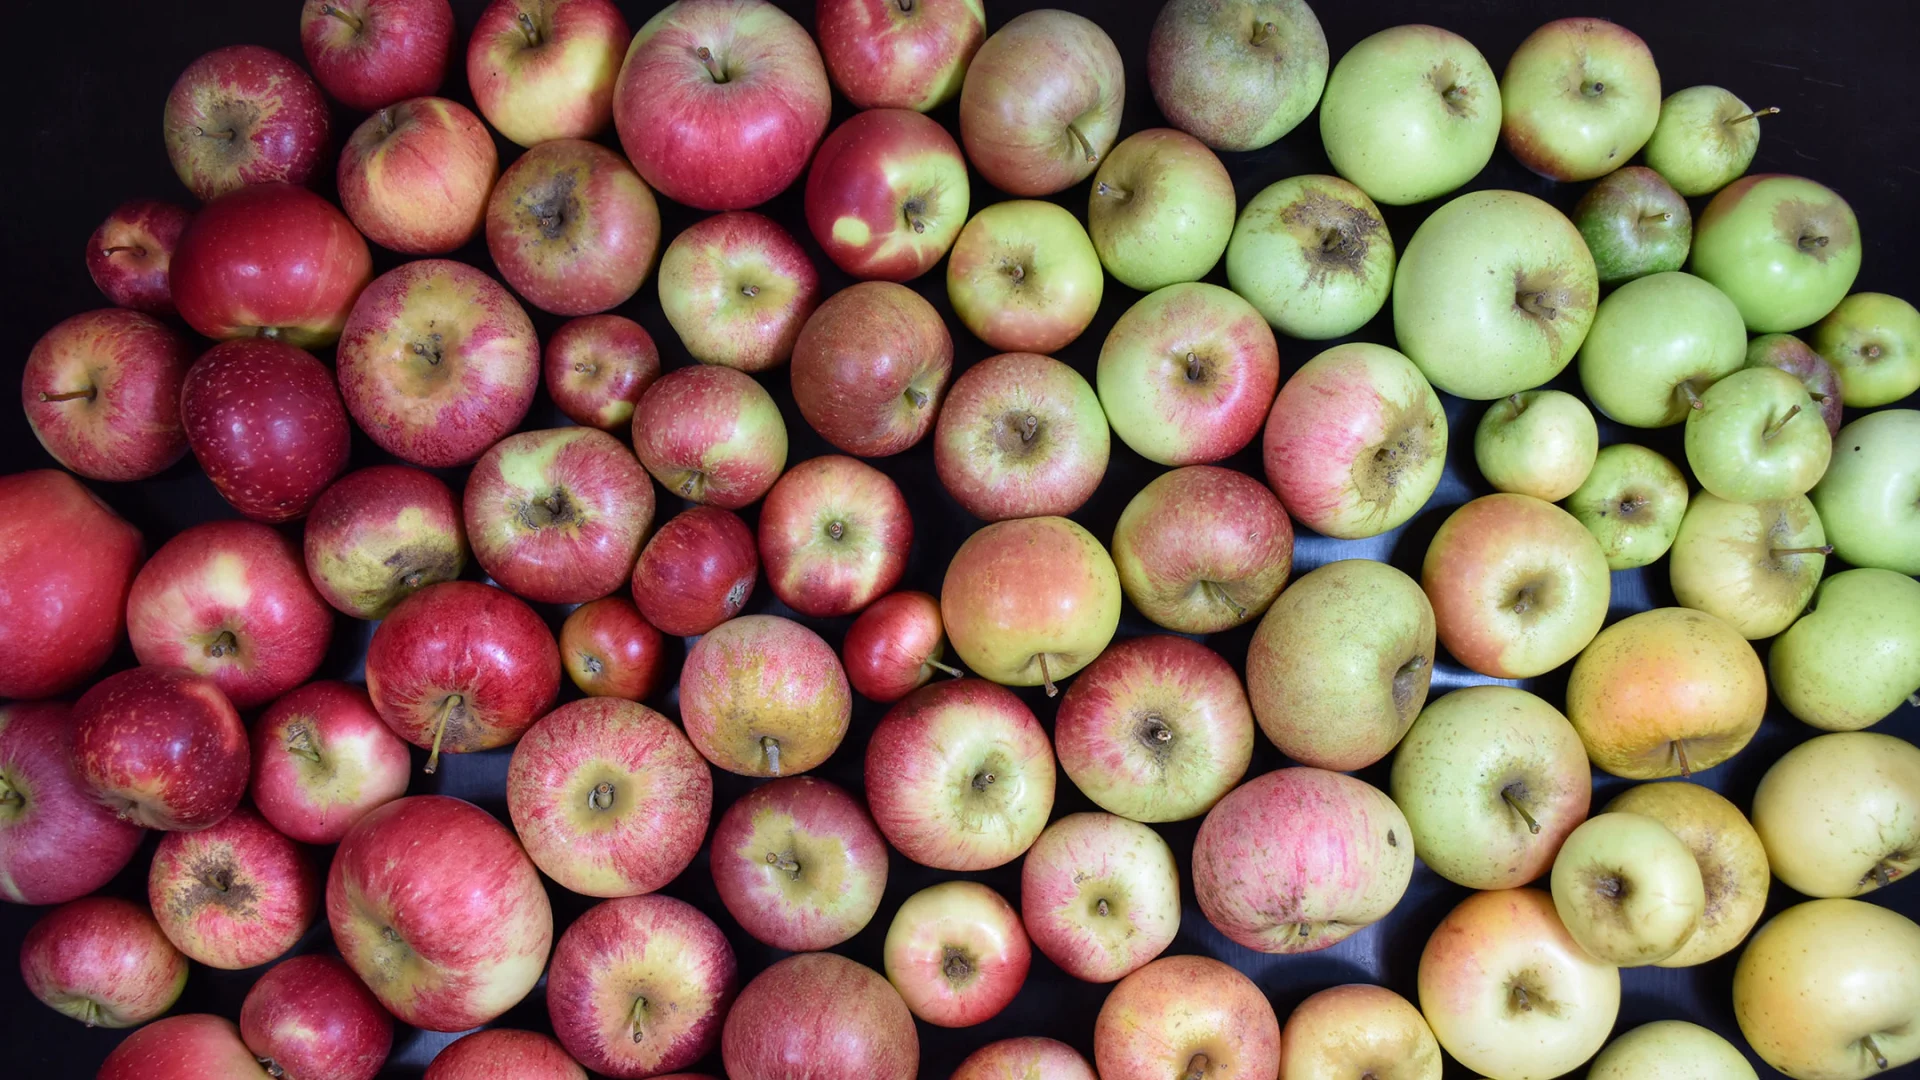 Apples in a wide range of colours – from red to green